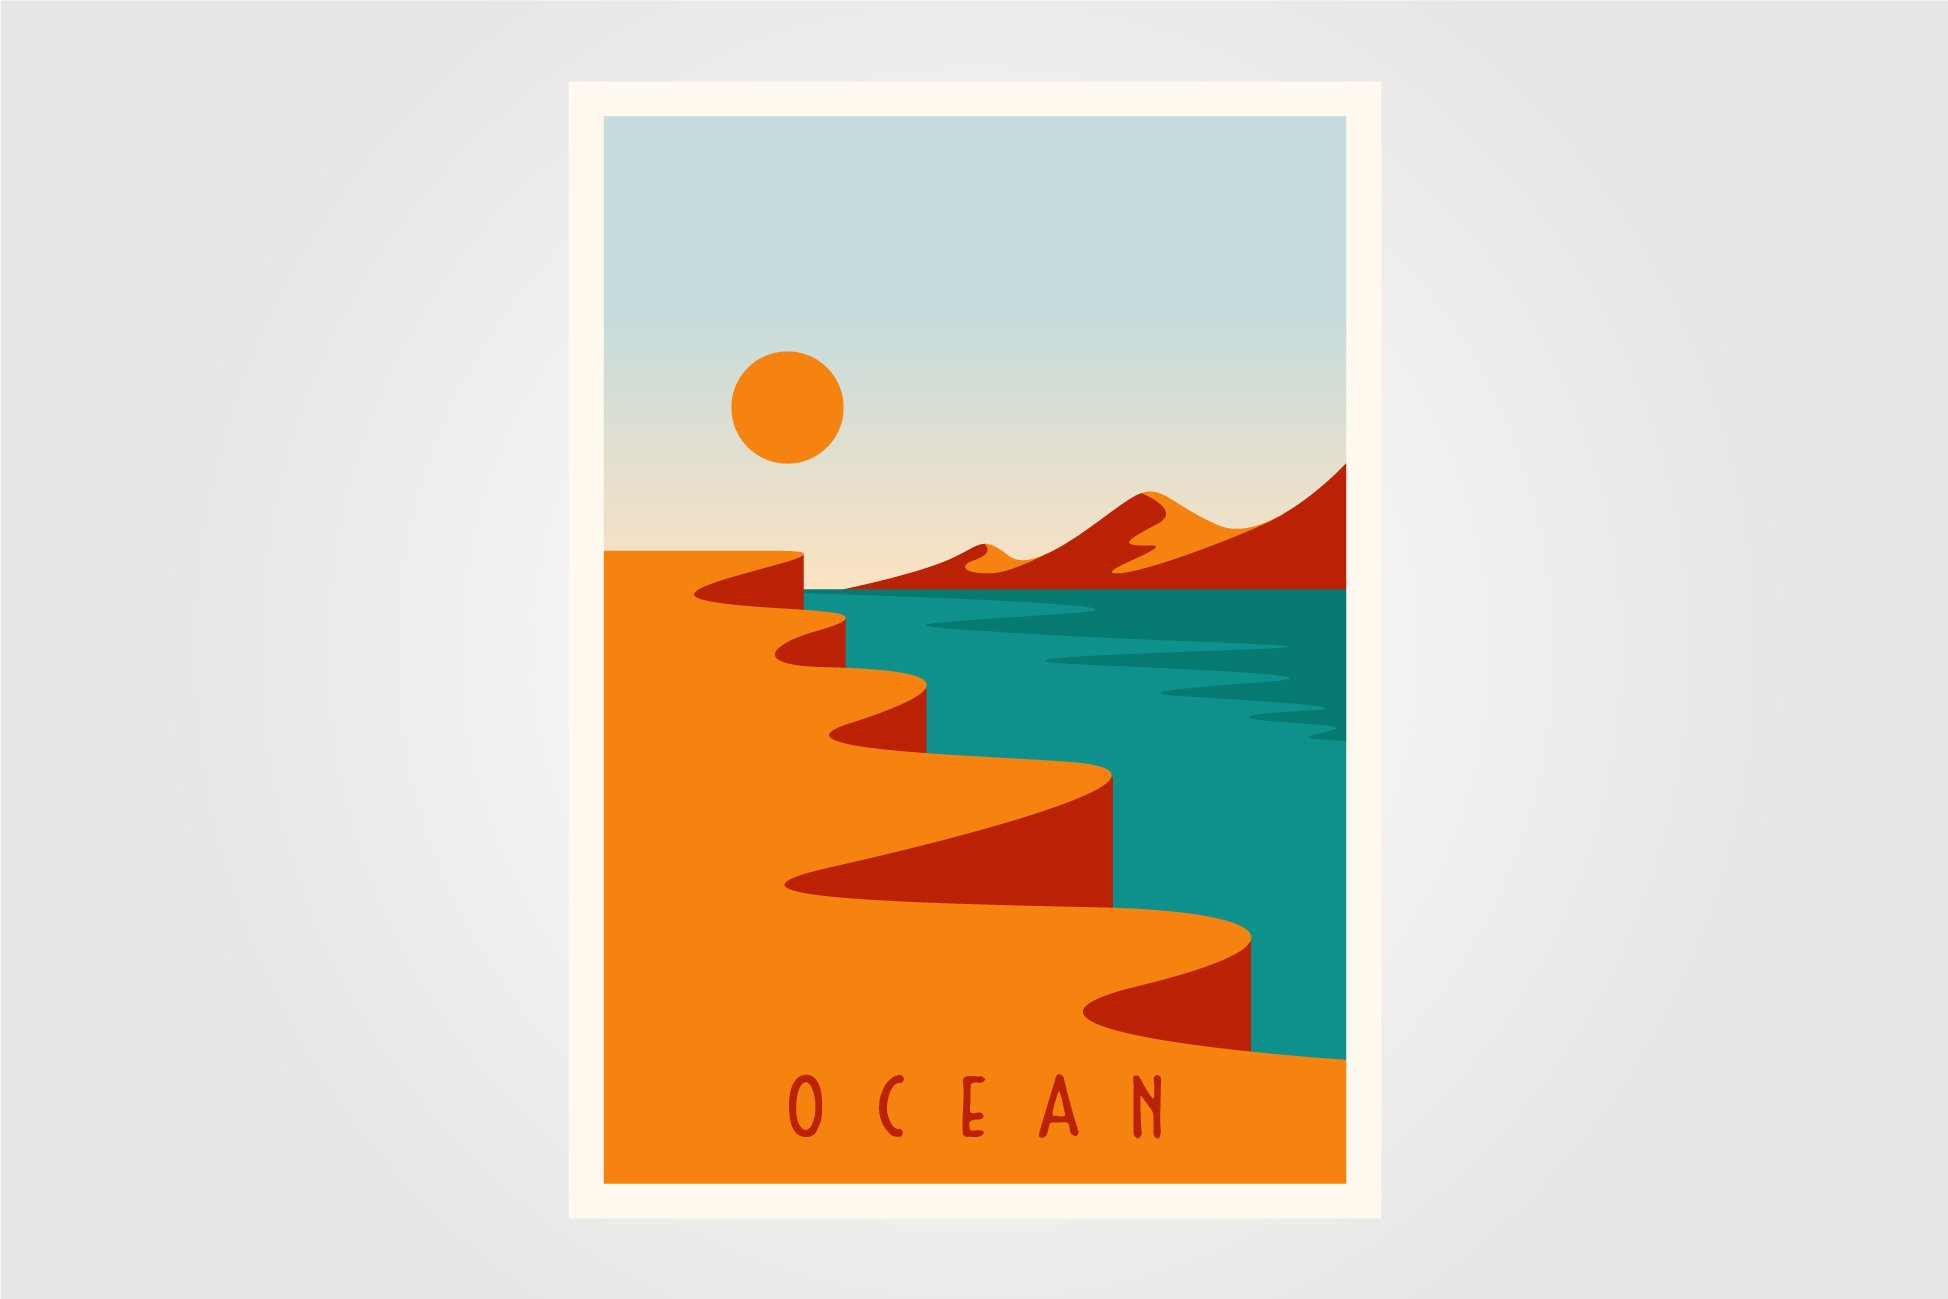 ocean sunset minimalist poster cover image.